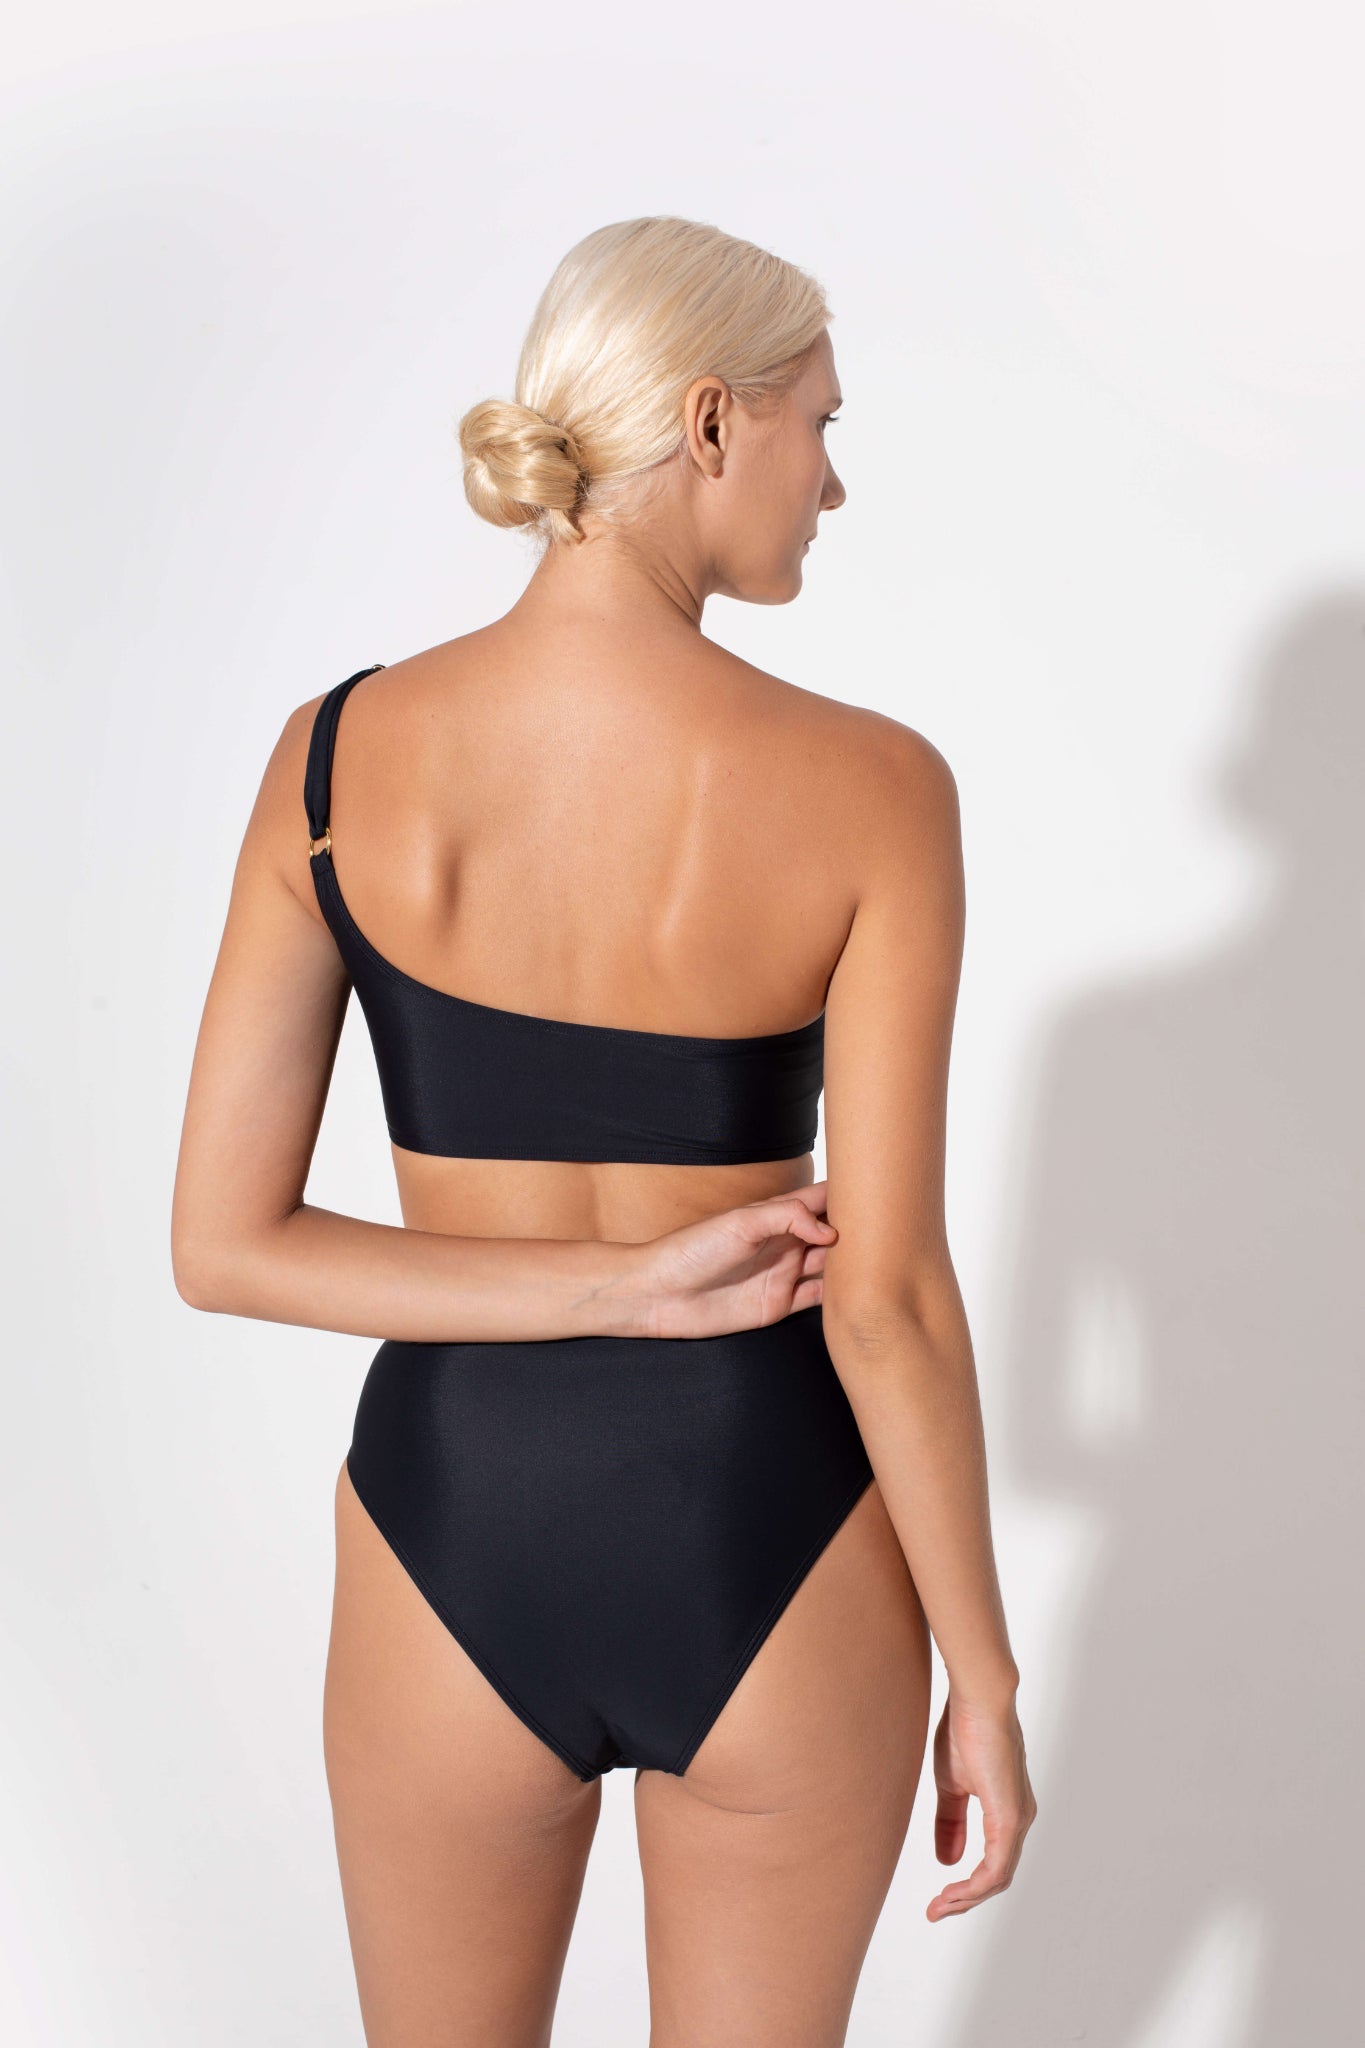 modern swimwear made from high quality fabrics. Luxury swimwear made by Koraru for any kind of activity, from playing beach sports to surfing